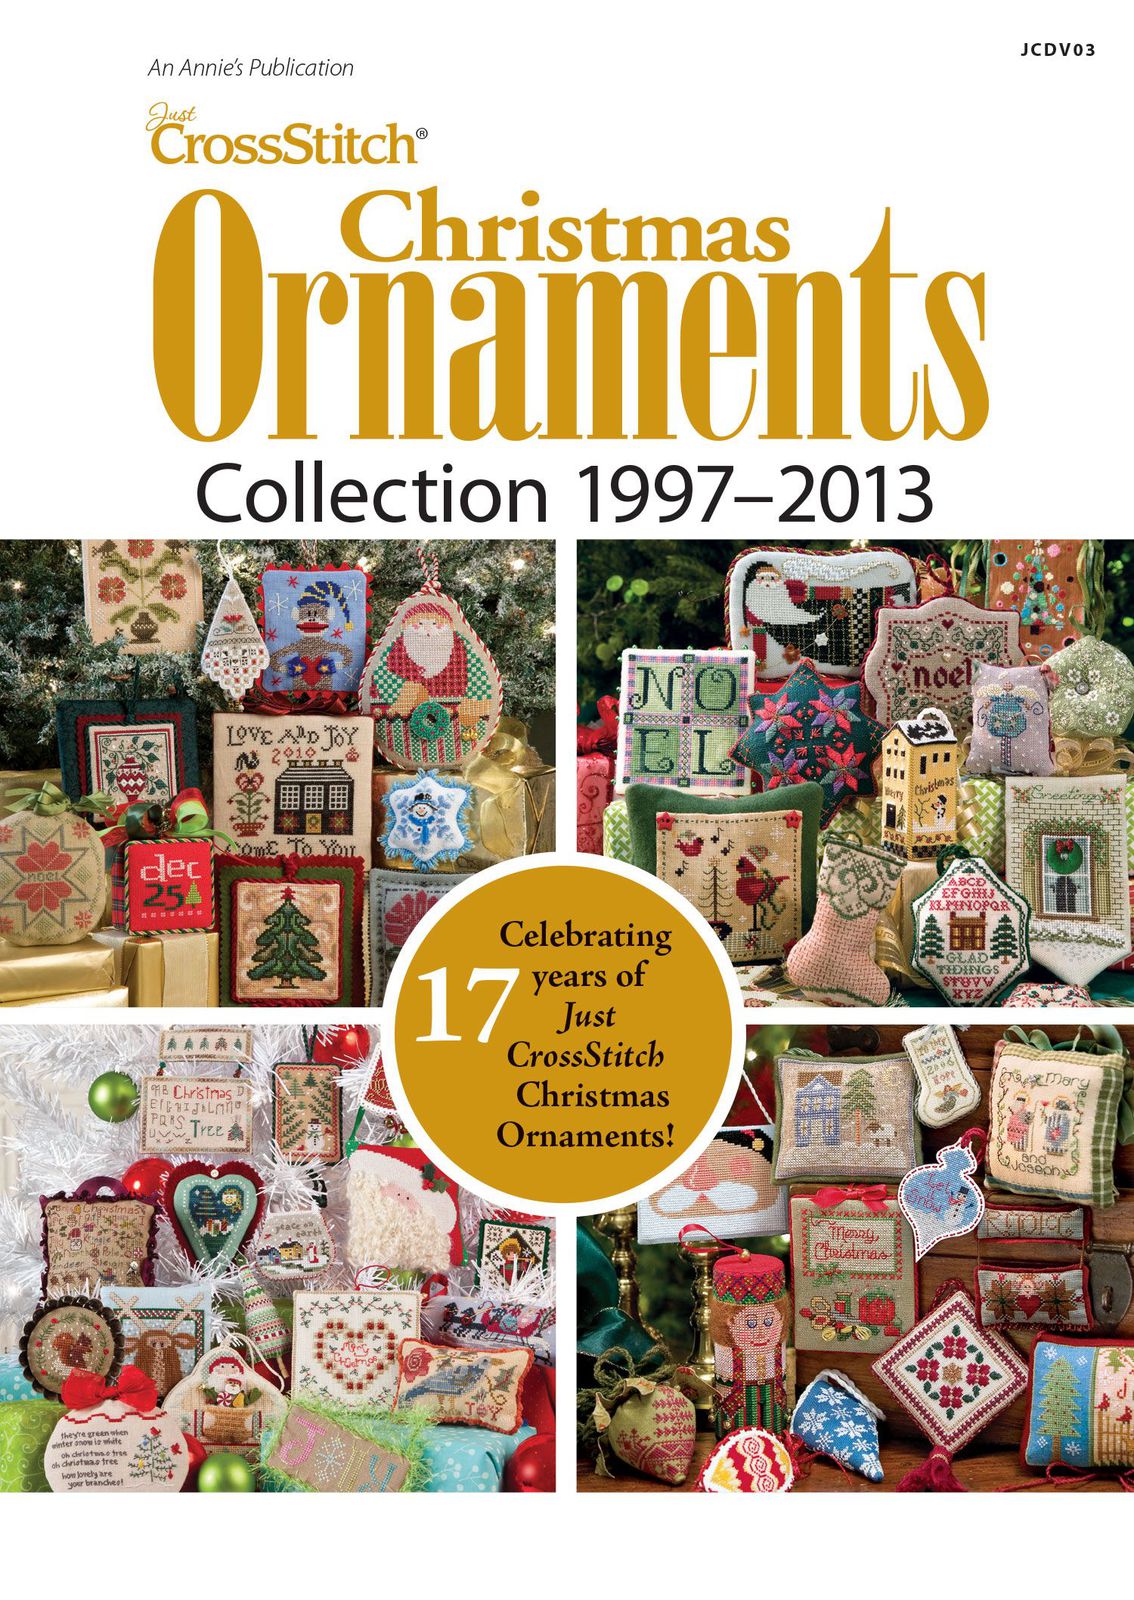 Just Cross Stitch Christmas Ornaments 1997-2013 Collection DVD magazine issues - $27.00